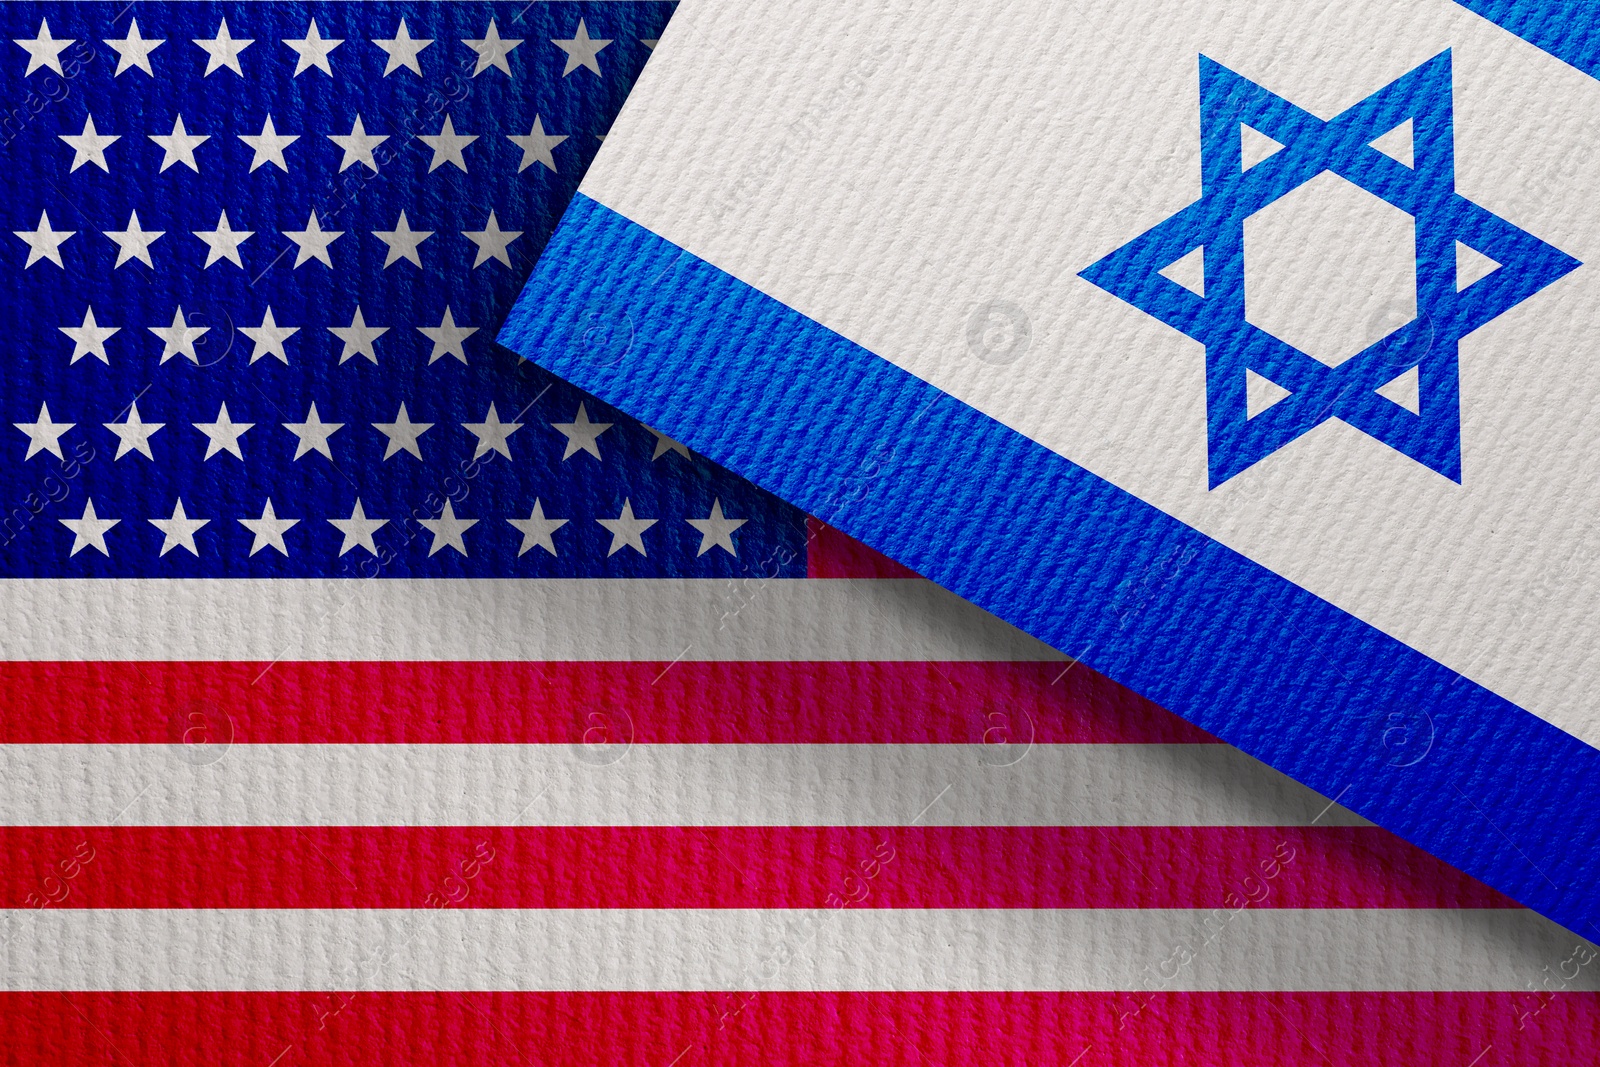 Image of International relations. National flags of Israel and USA on textured surface